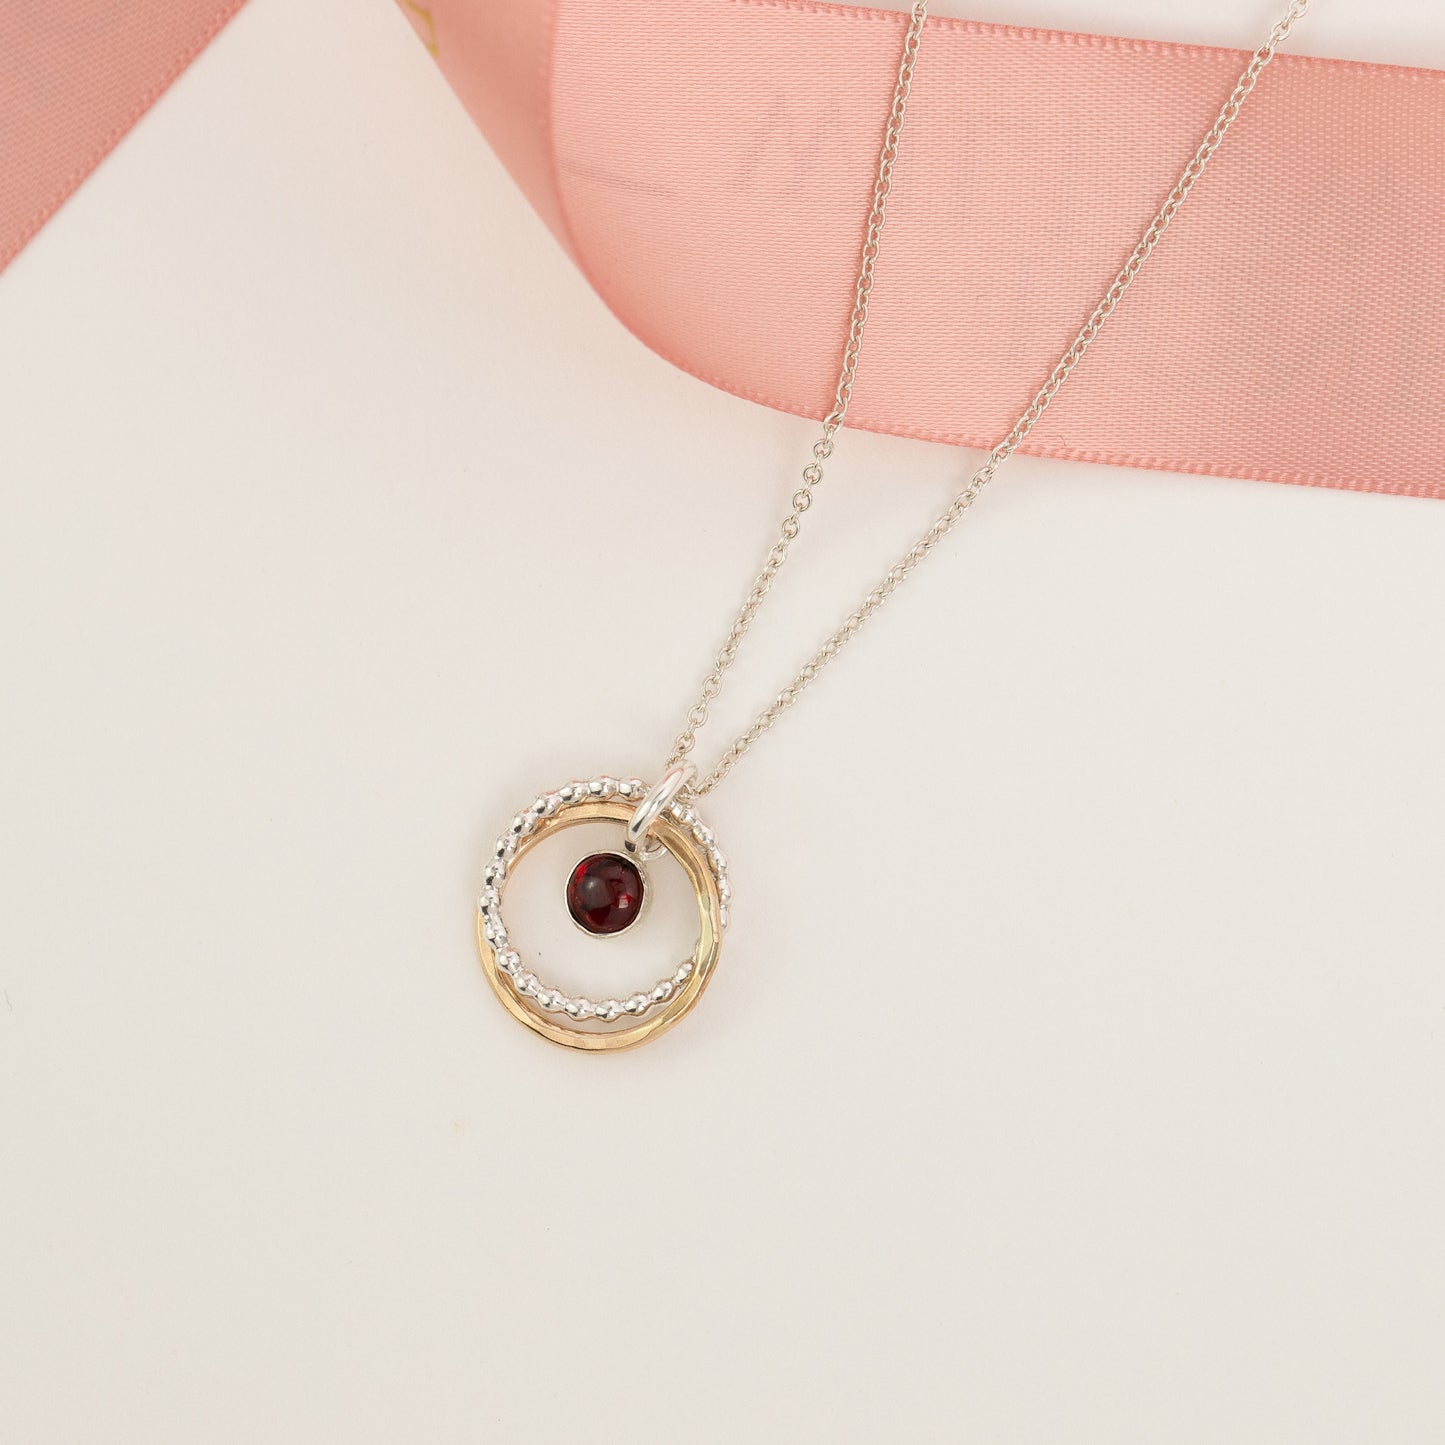 2nd Anniversary Gift - Garnet Necklace - Silver & Gold